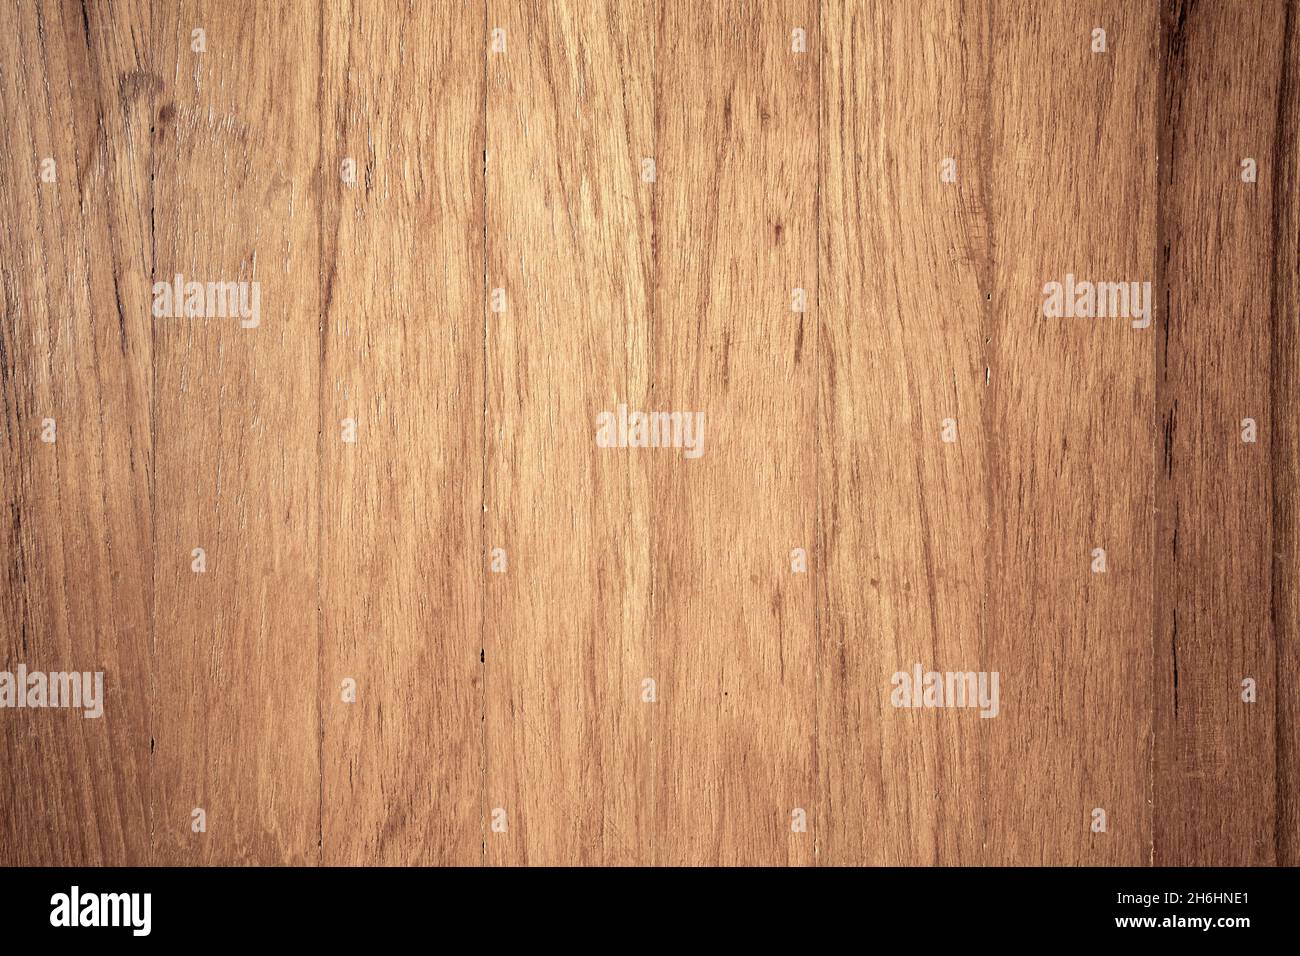 Light brown panel wood texture background Stock Photo